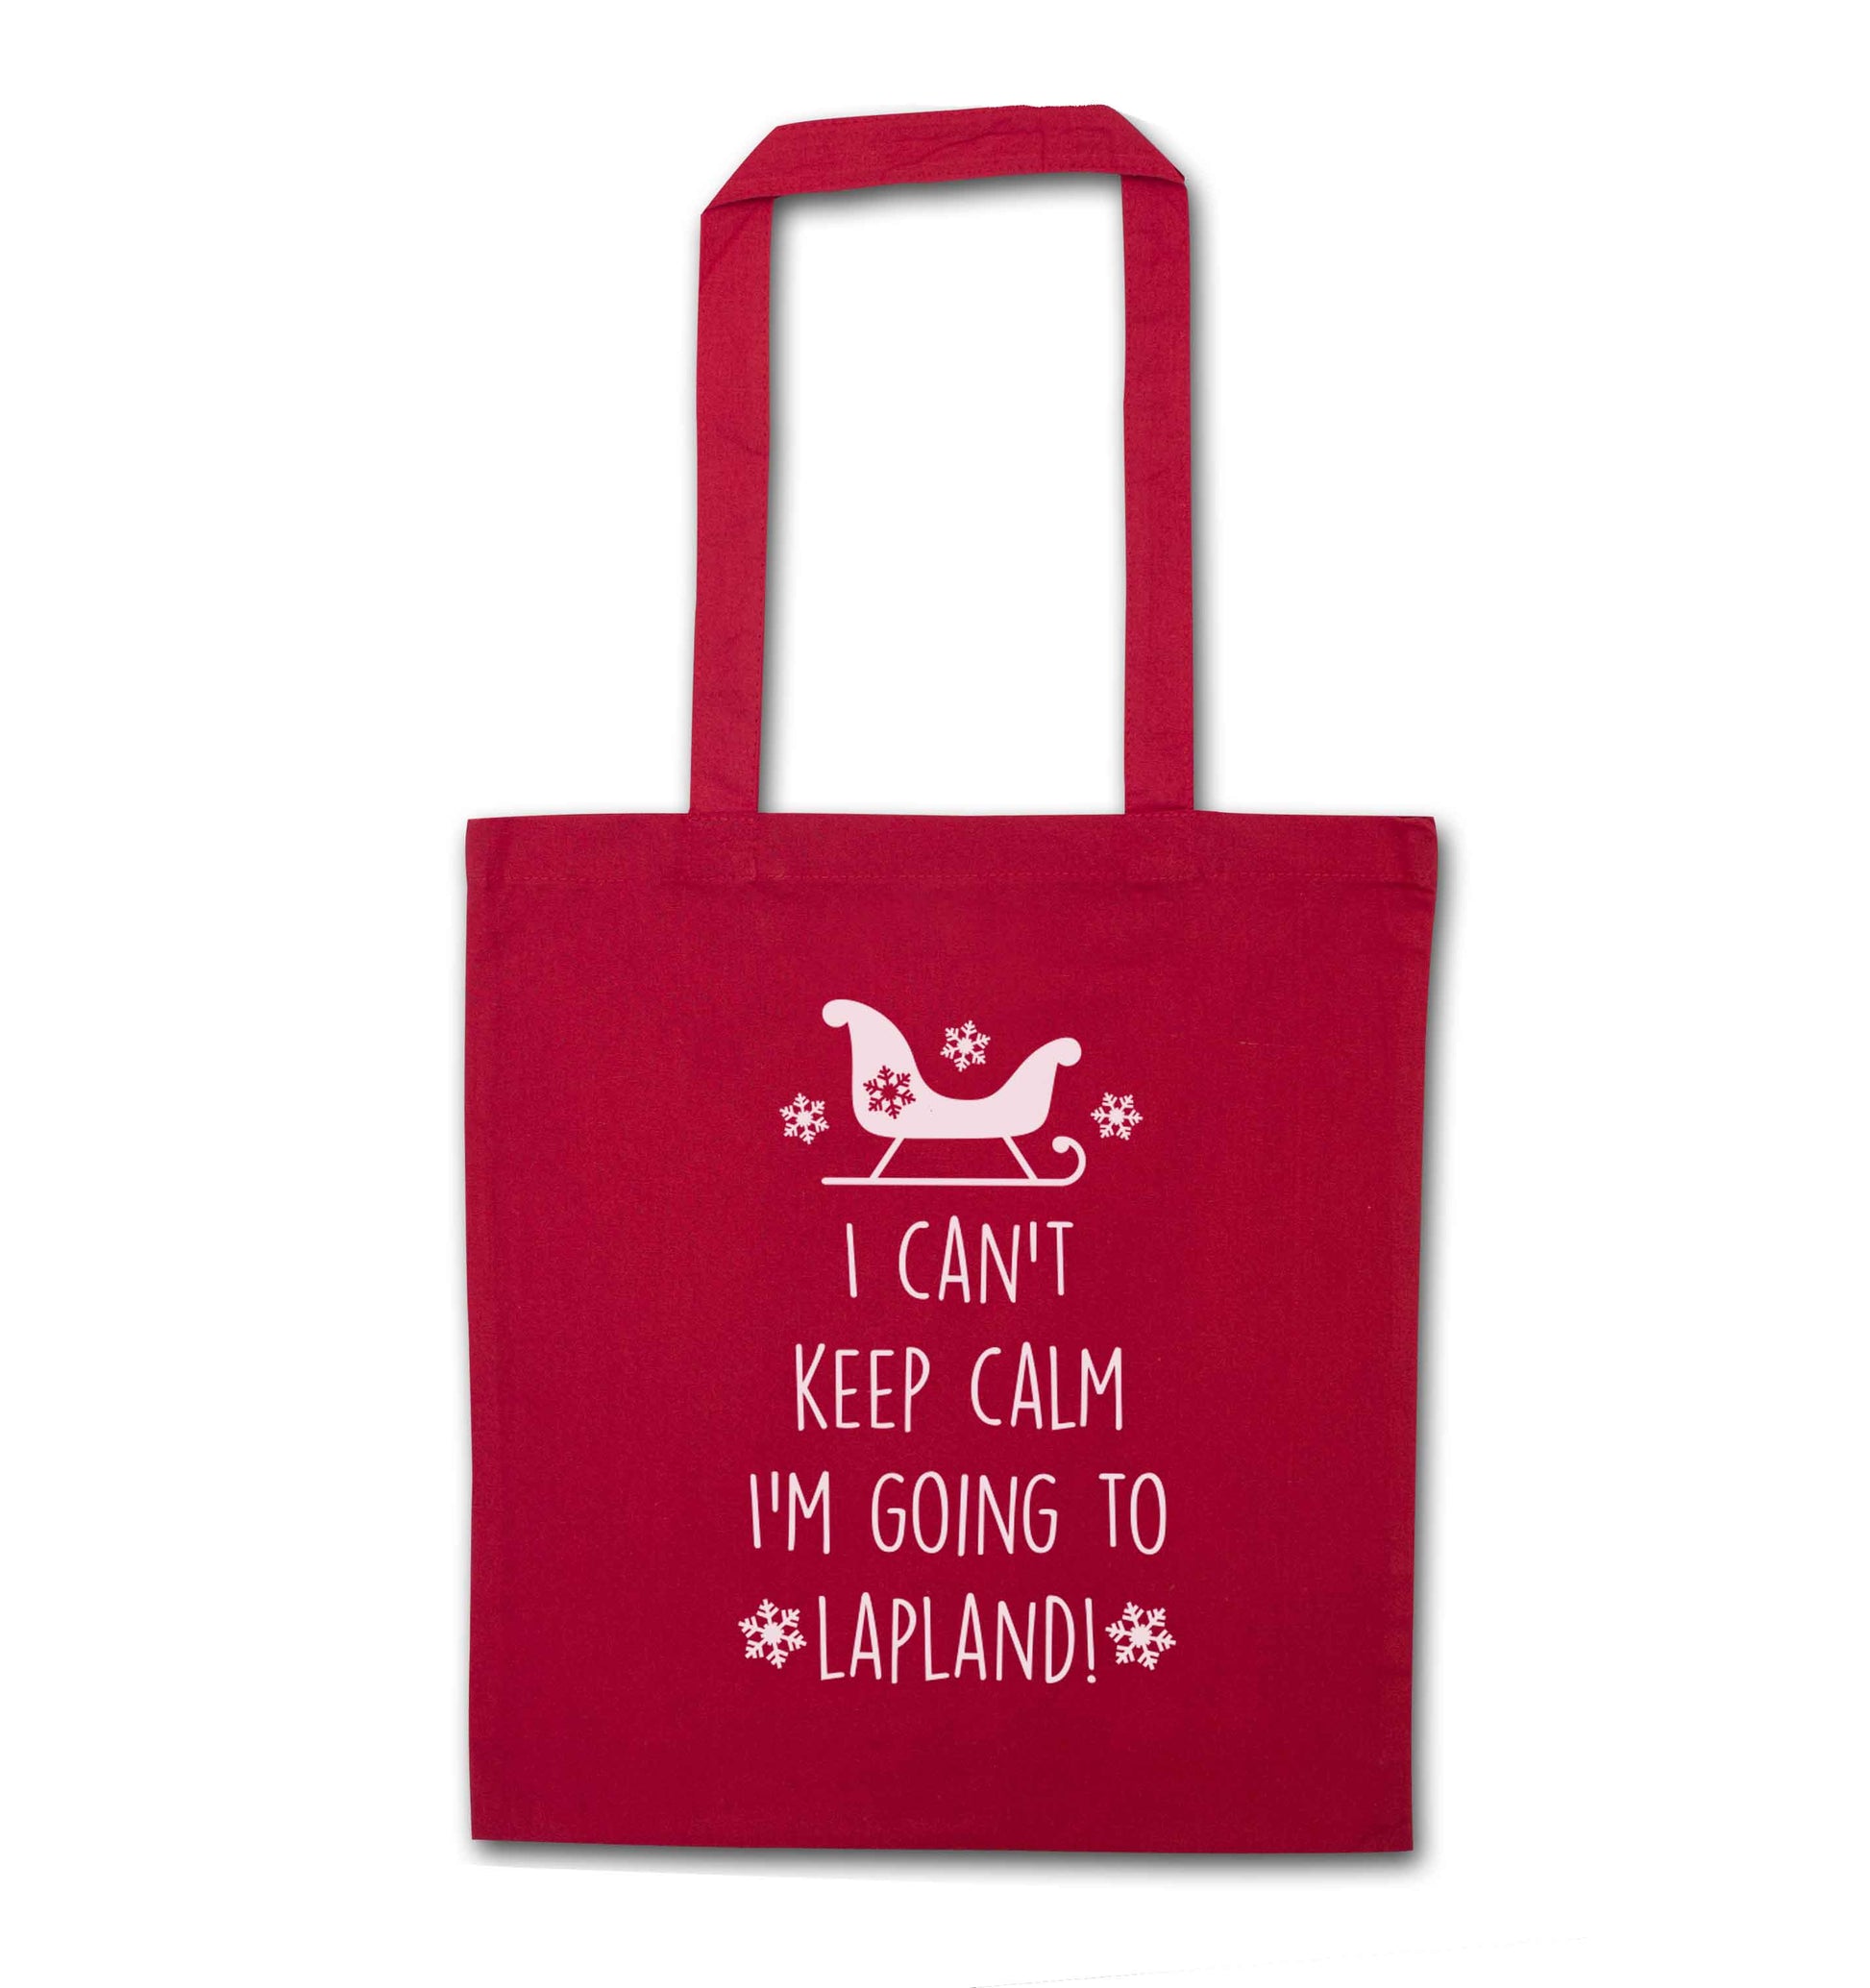 I can't keep calm I'm going to Lapland red tote bag